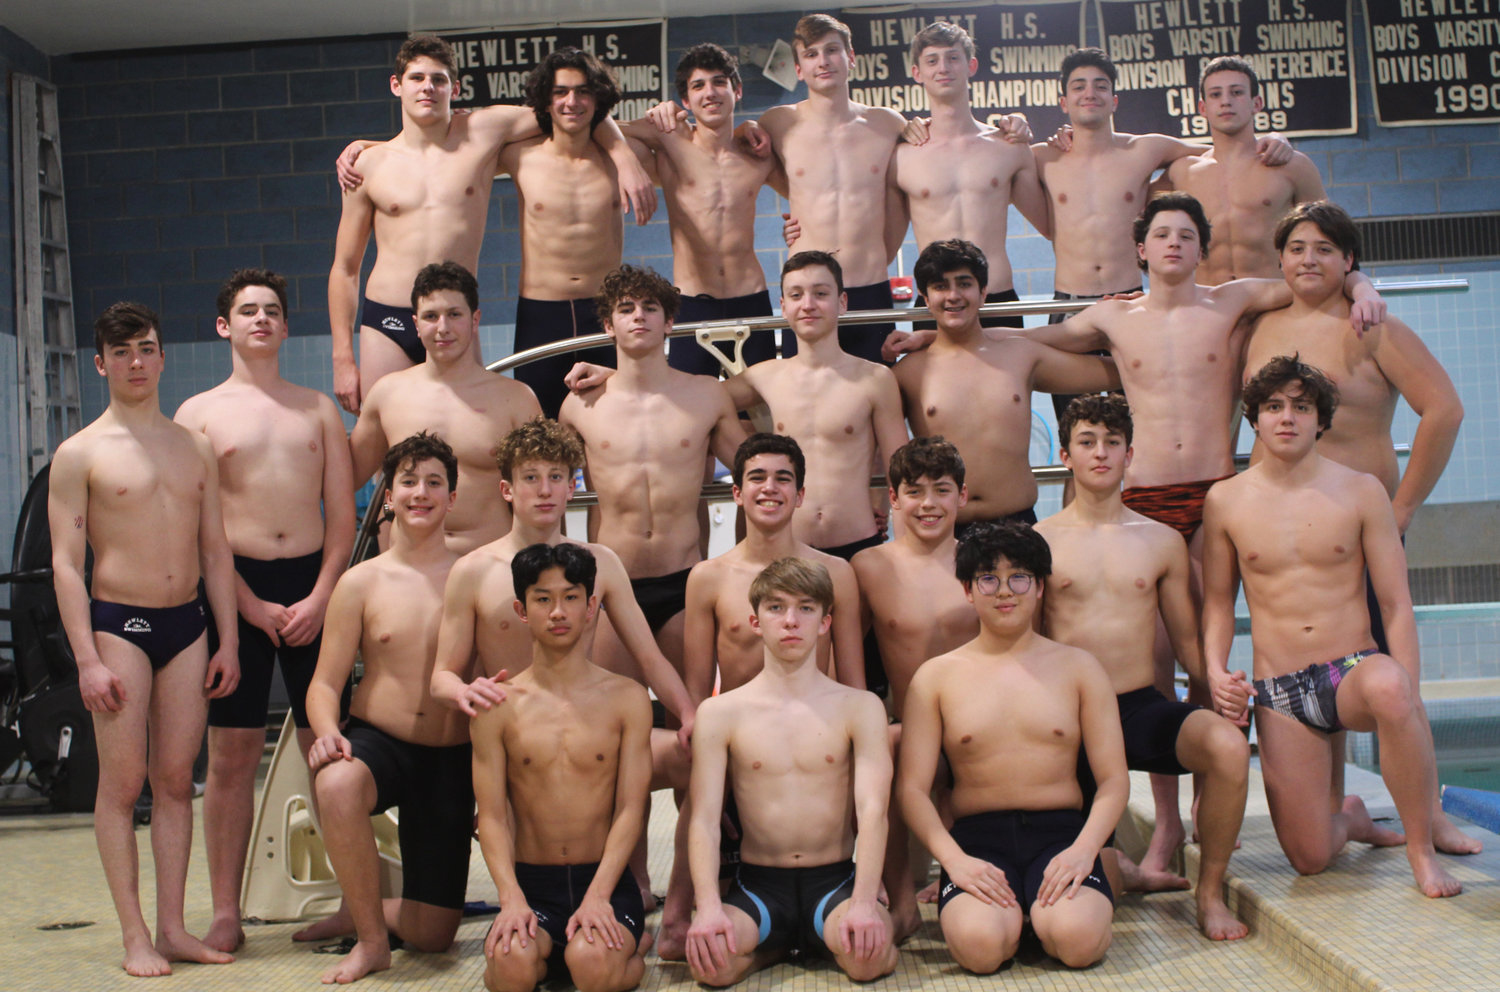 For the first time in more than 30 years, Hewlett captured the Nassau County boys’ swimming championship.